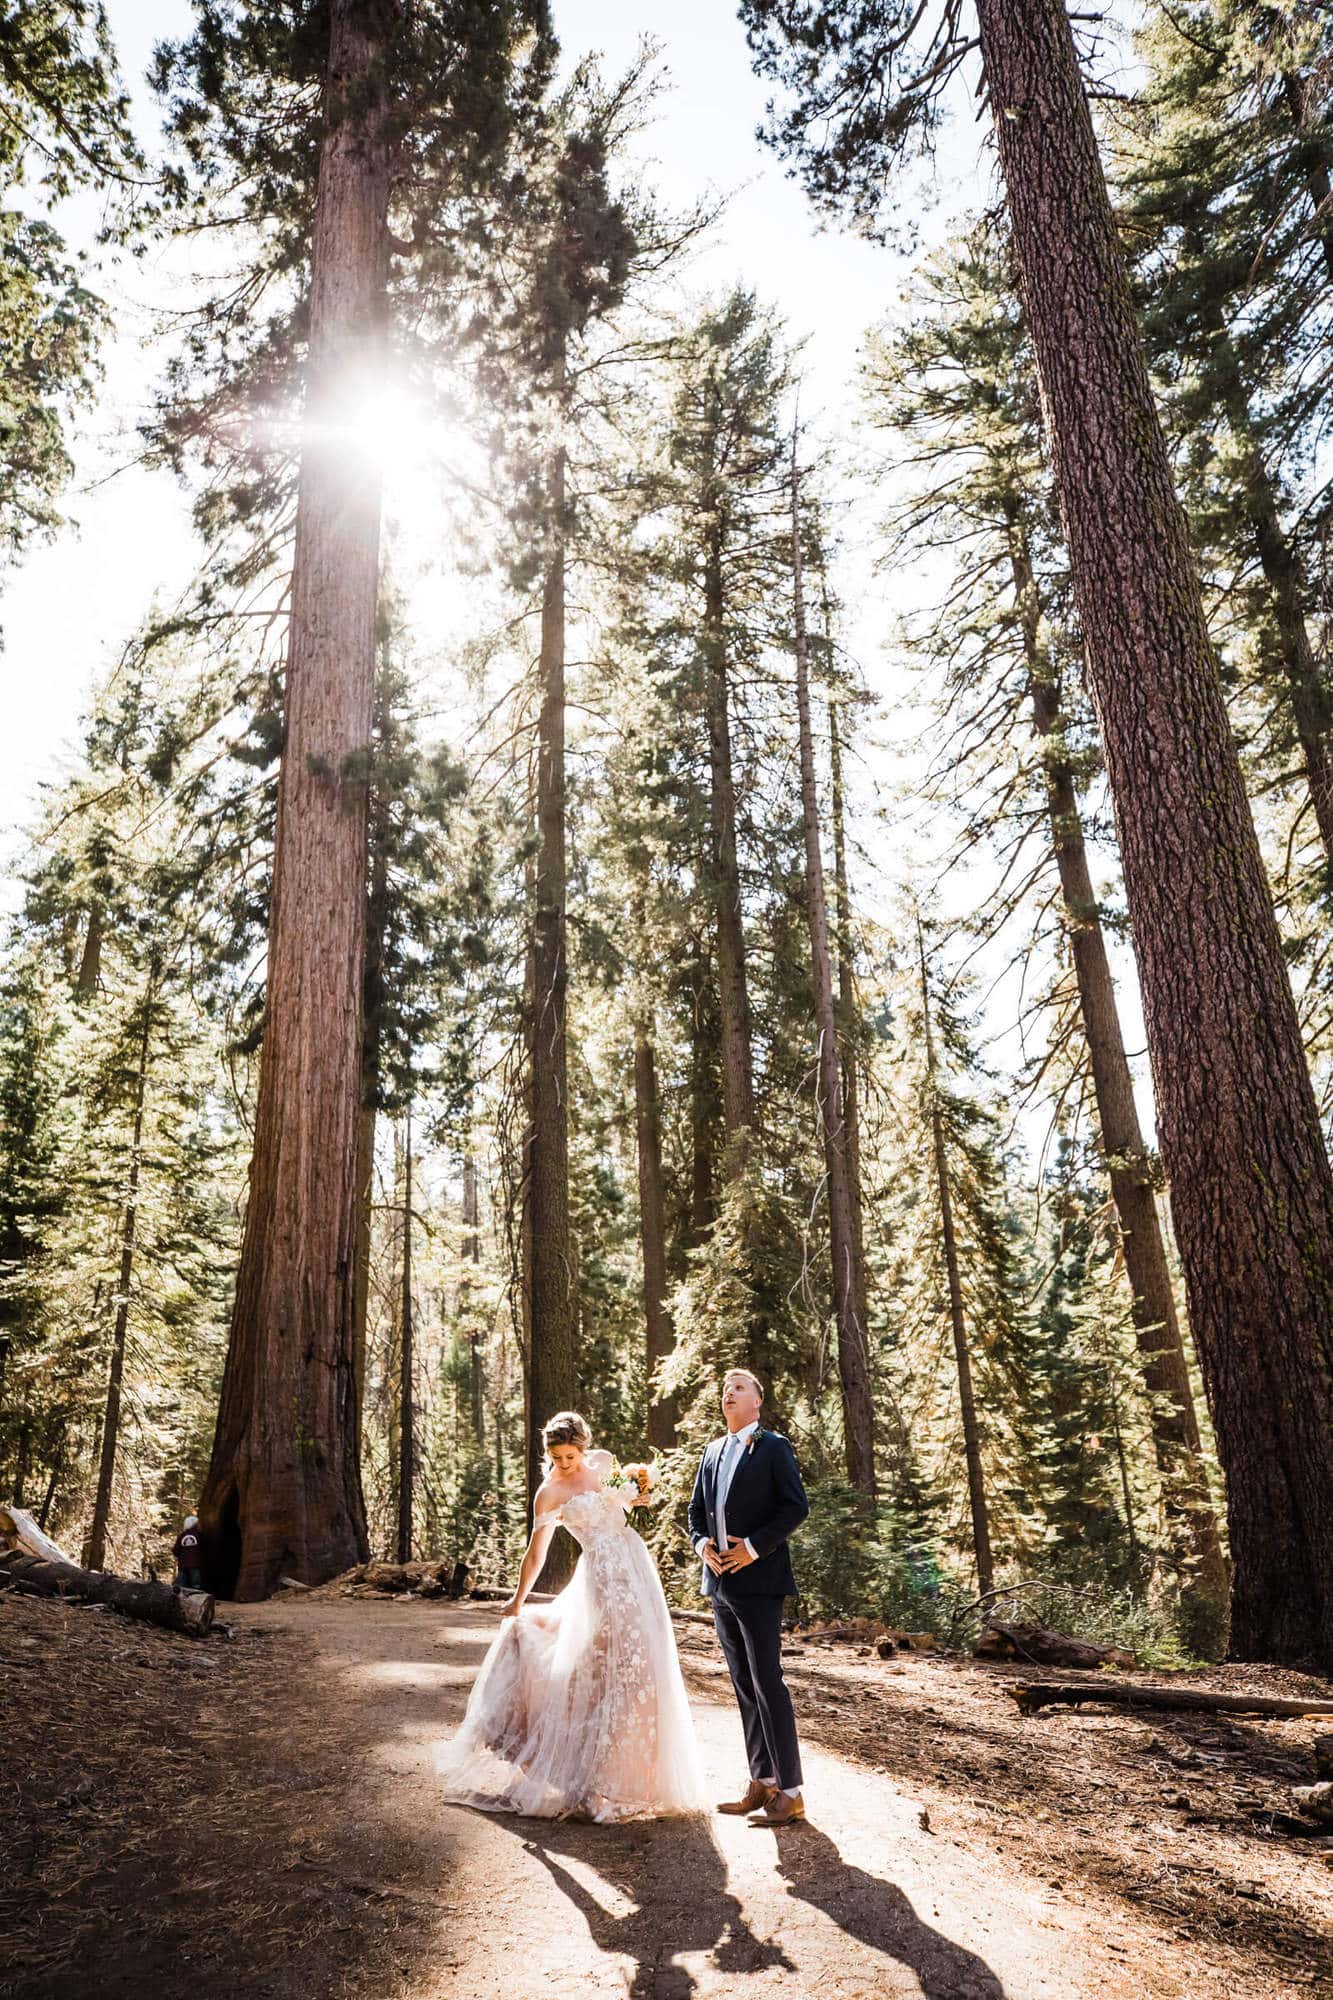 Having a Yosemite wedding is a total dream. This couple adventured around the park in epic fashion and is not to be missed. 